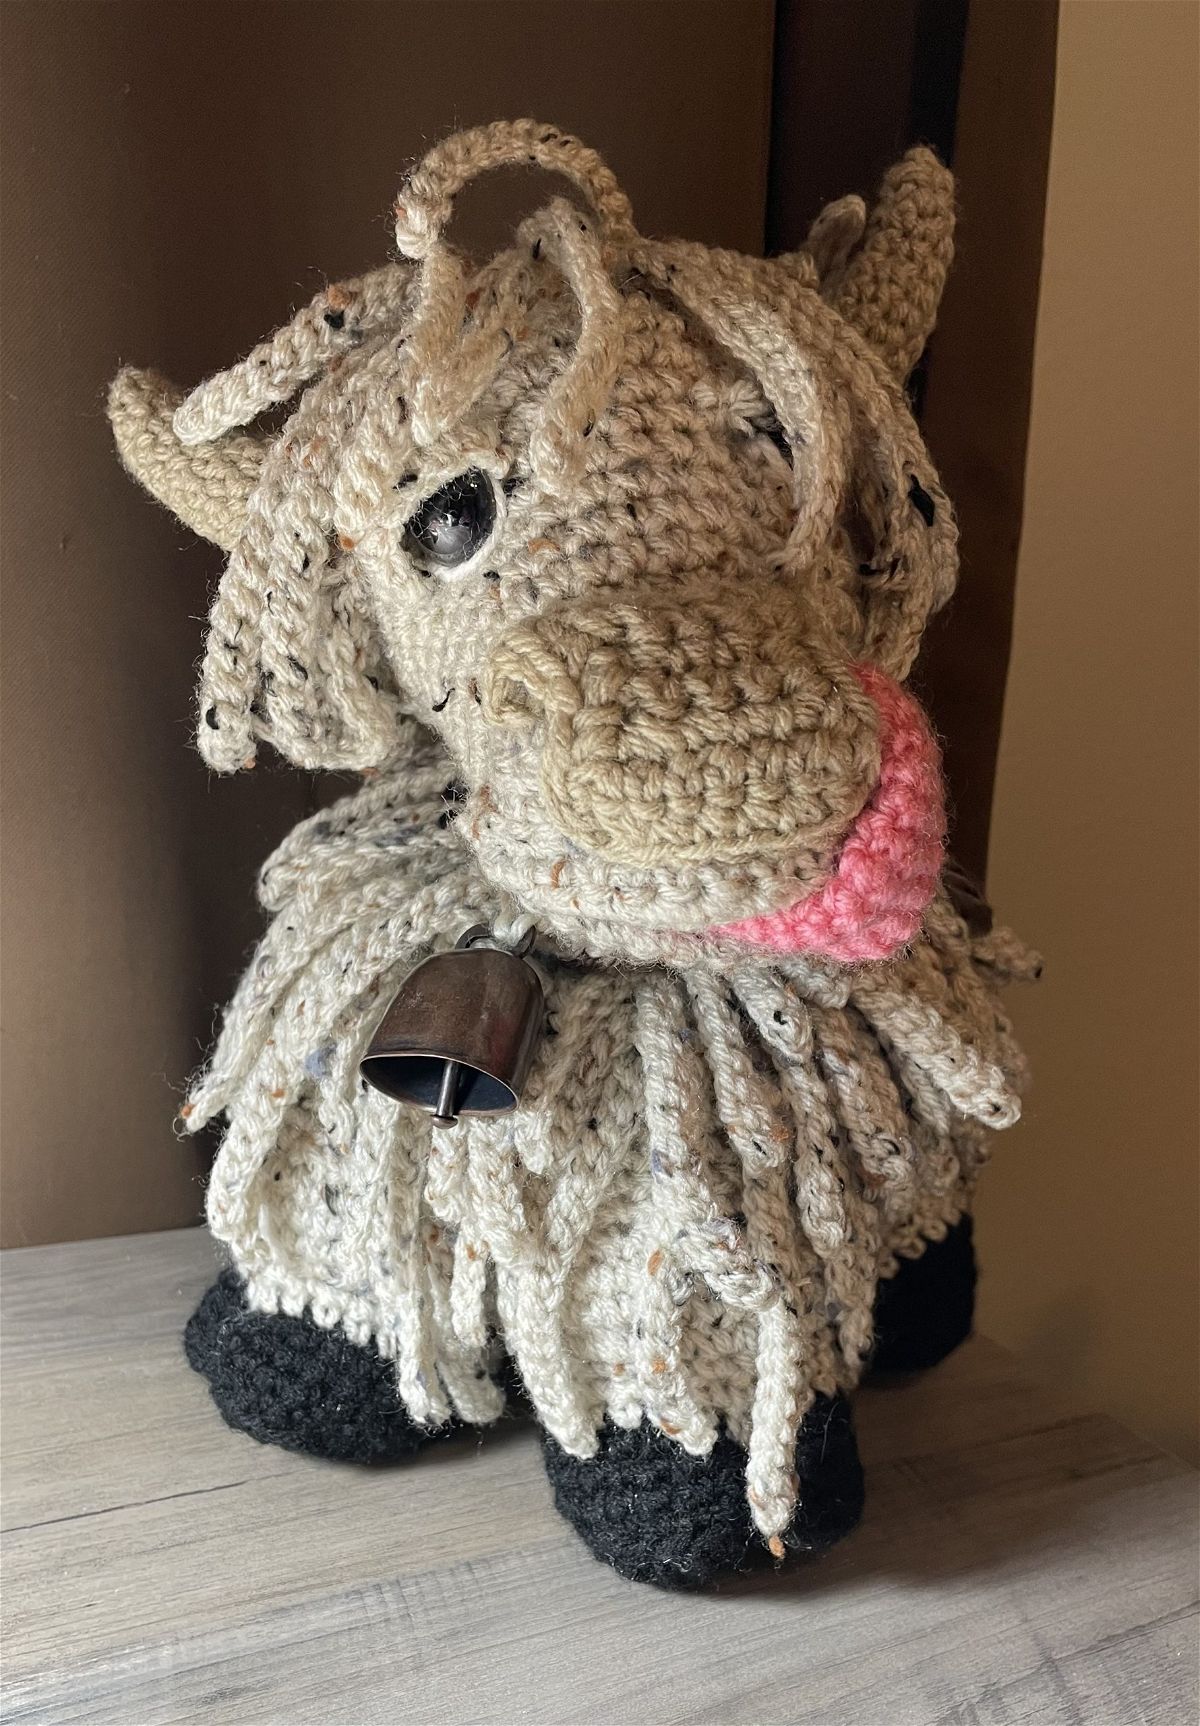 Highland Cow Amigurumi Crochet Pattern Review by Cindy Quick for Cottontail Whiskers